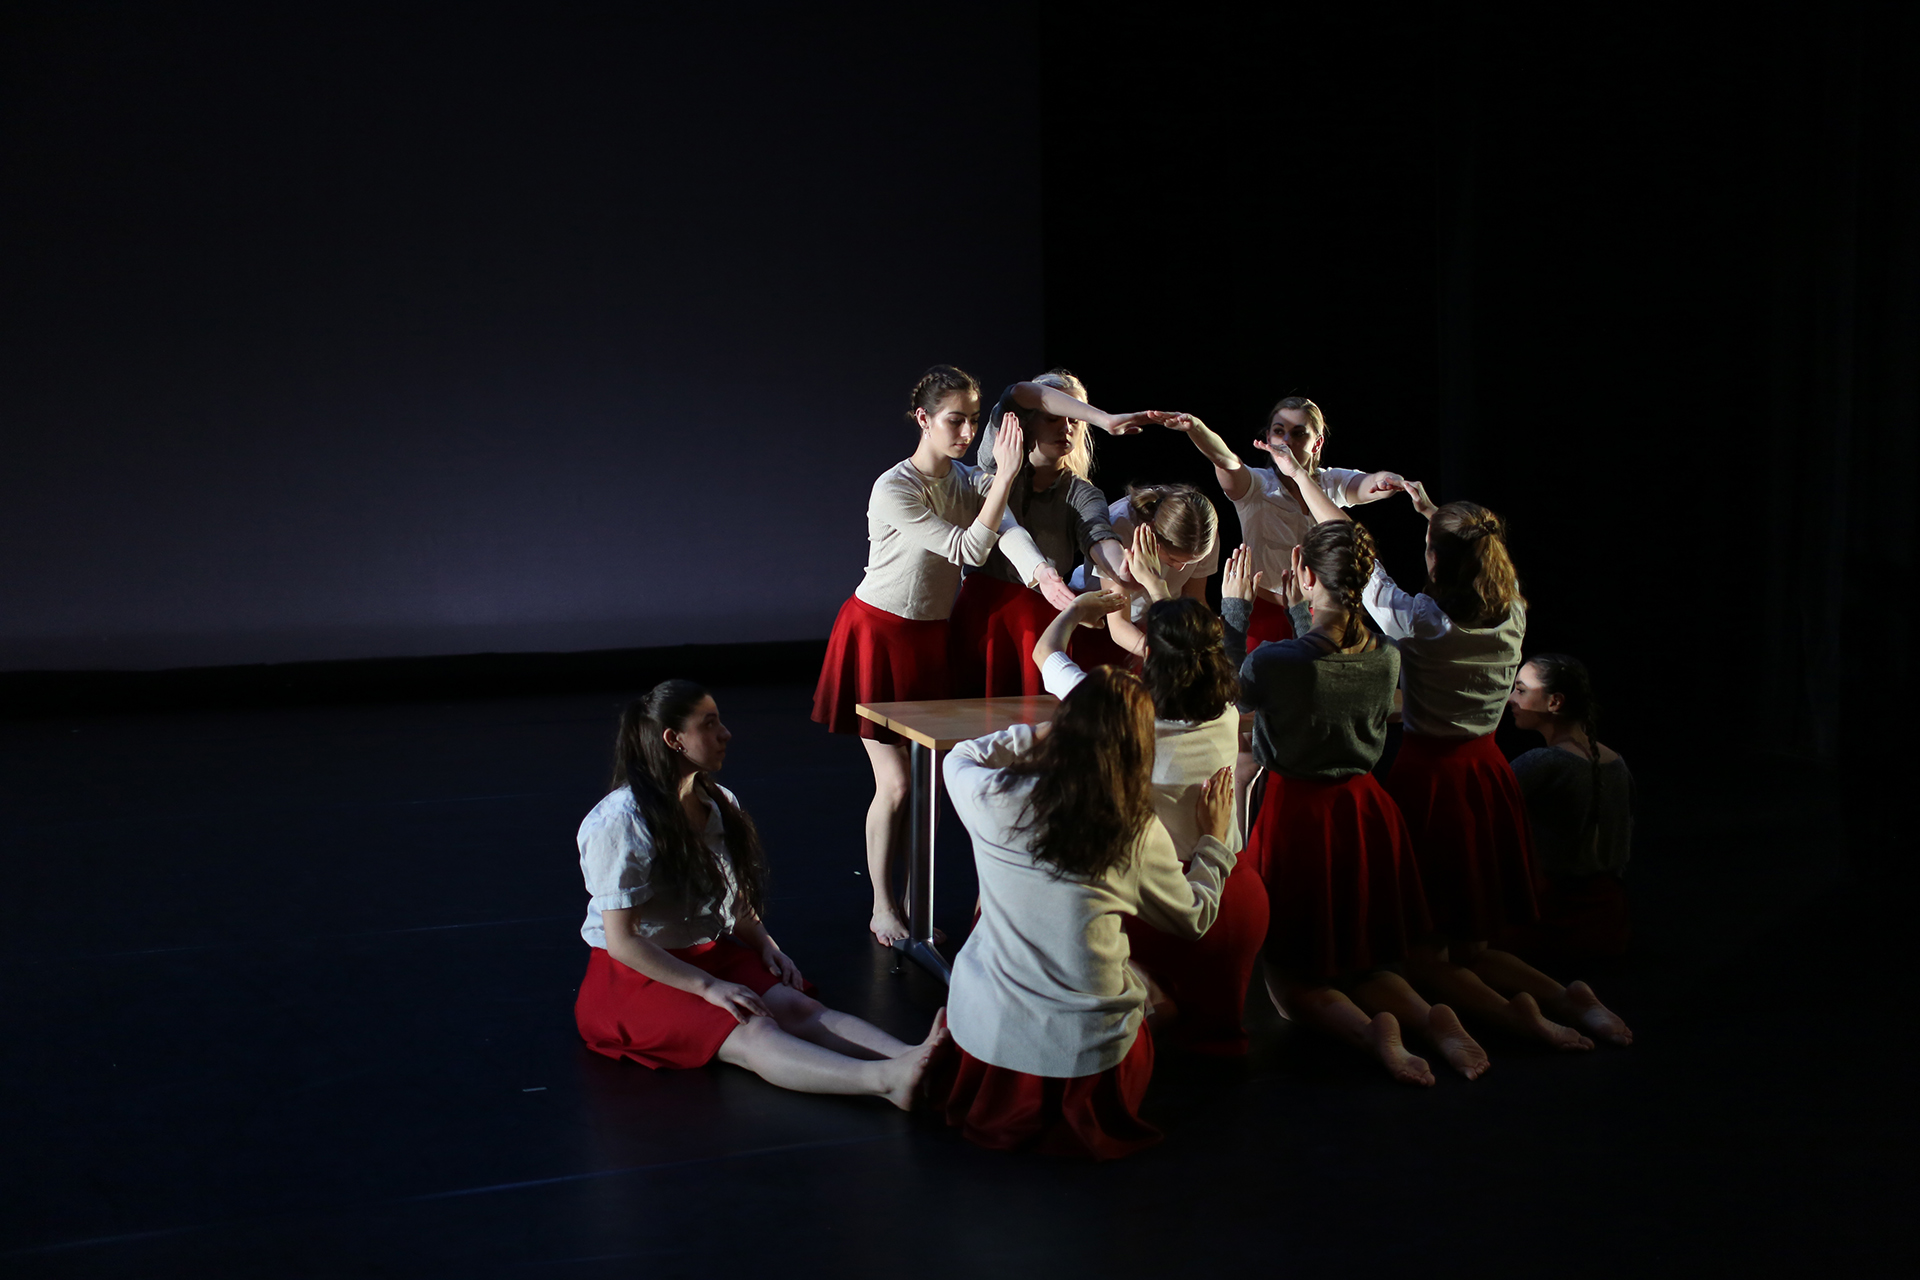 "Slow Dance" Choreographed by Meredith Baughman in collaboration with the dancers